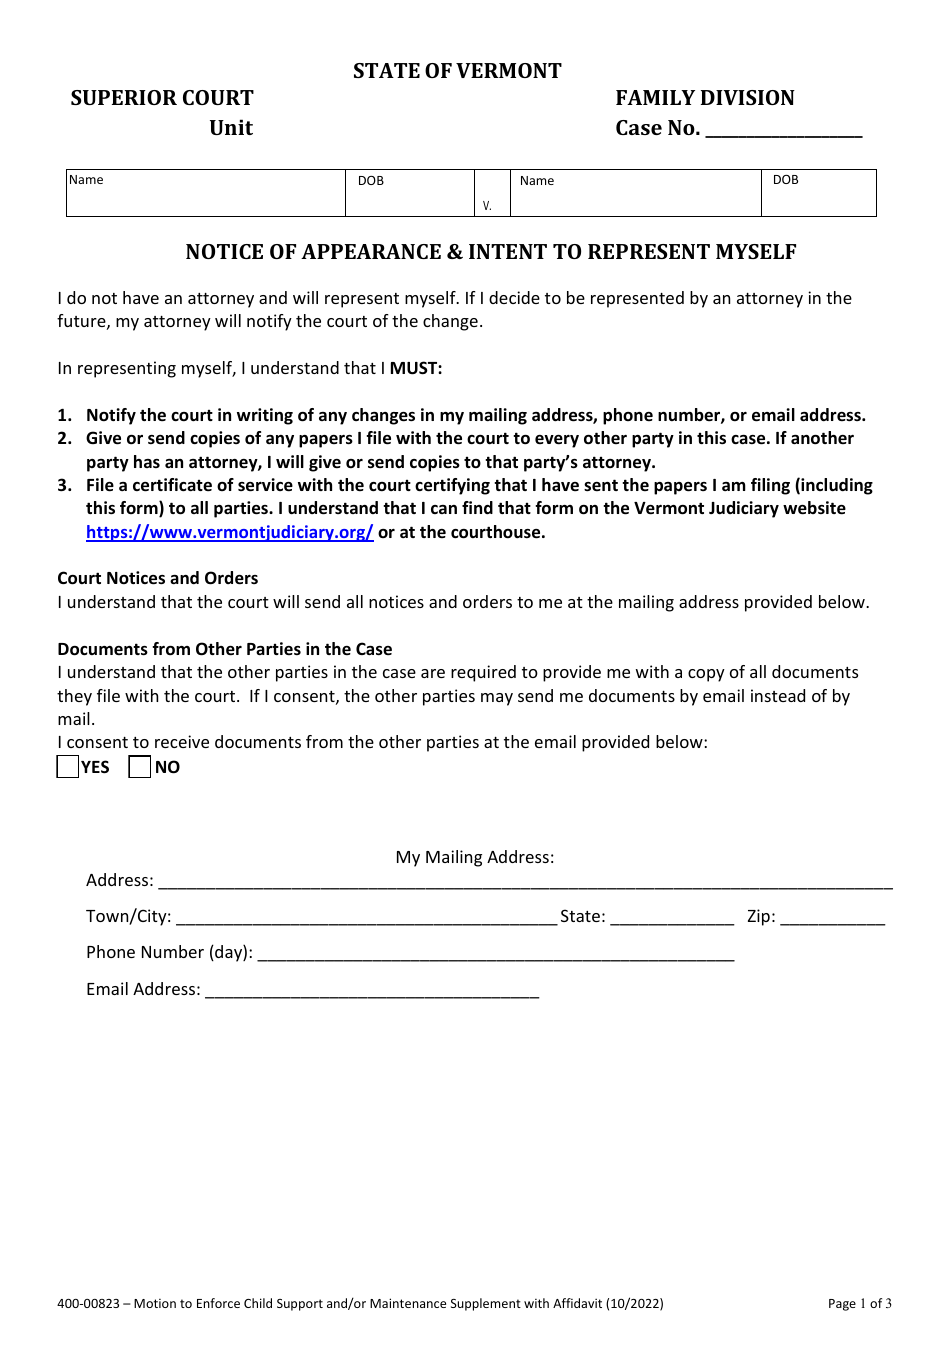 Form 400-00823 Notice of Appearance  Intent to Represent Myself - Vermont, Page 1